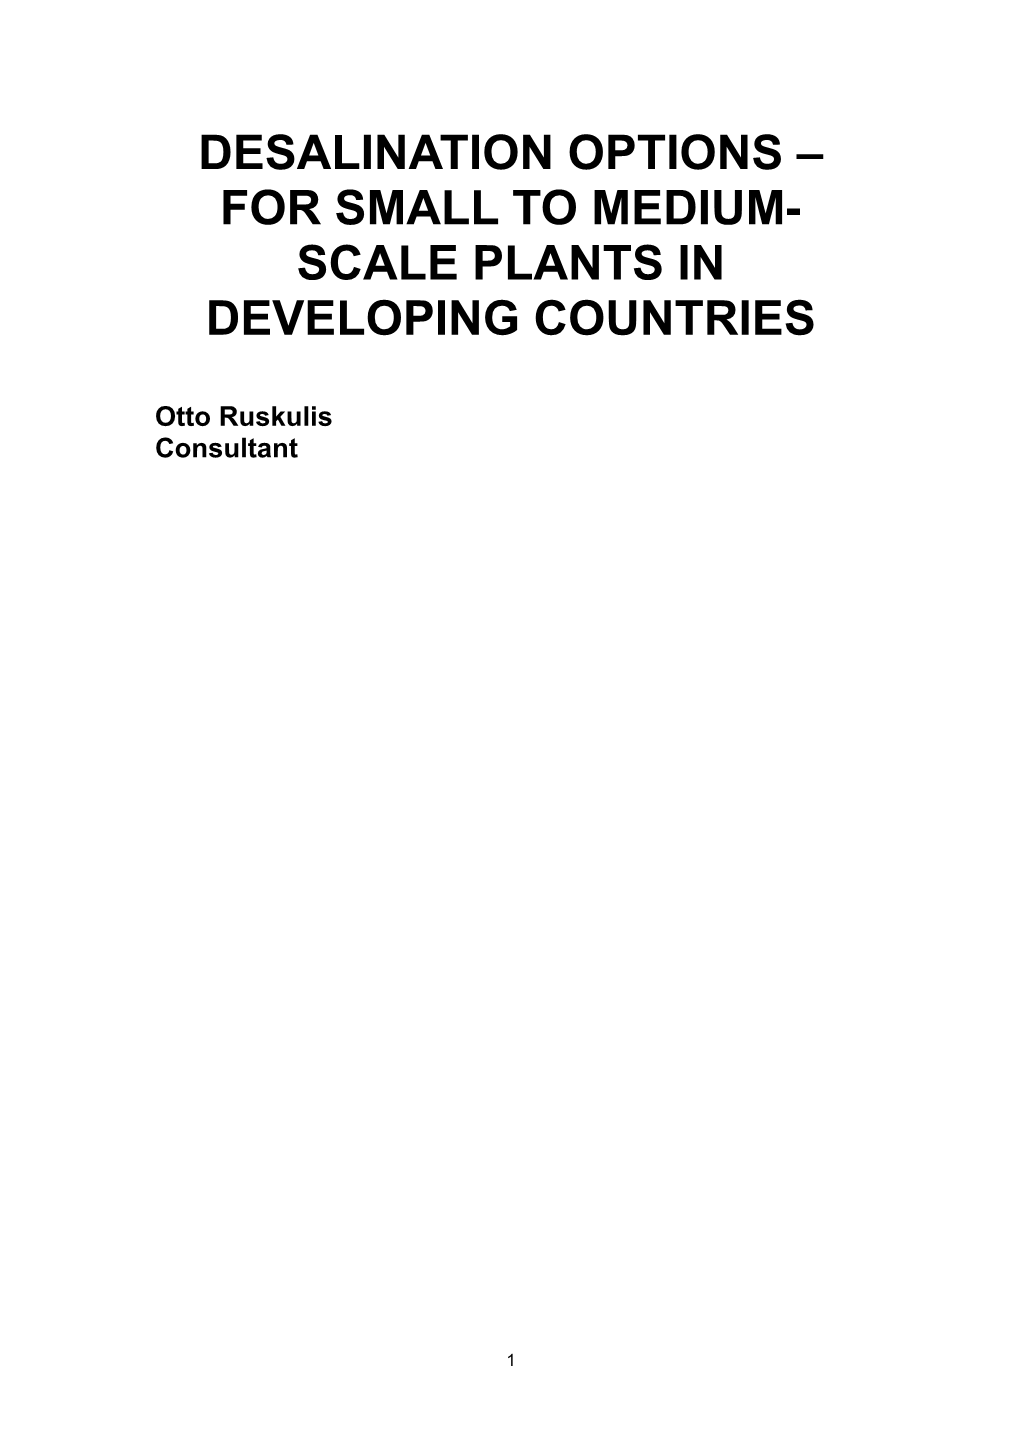 Desalination Options for Small to Medium-Scale Plants in Developing Countries